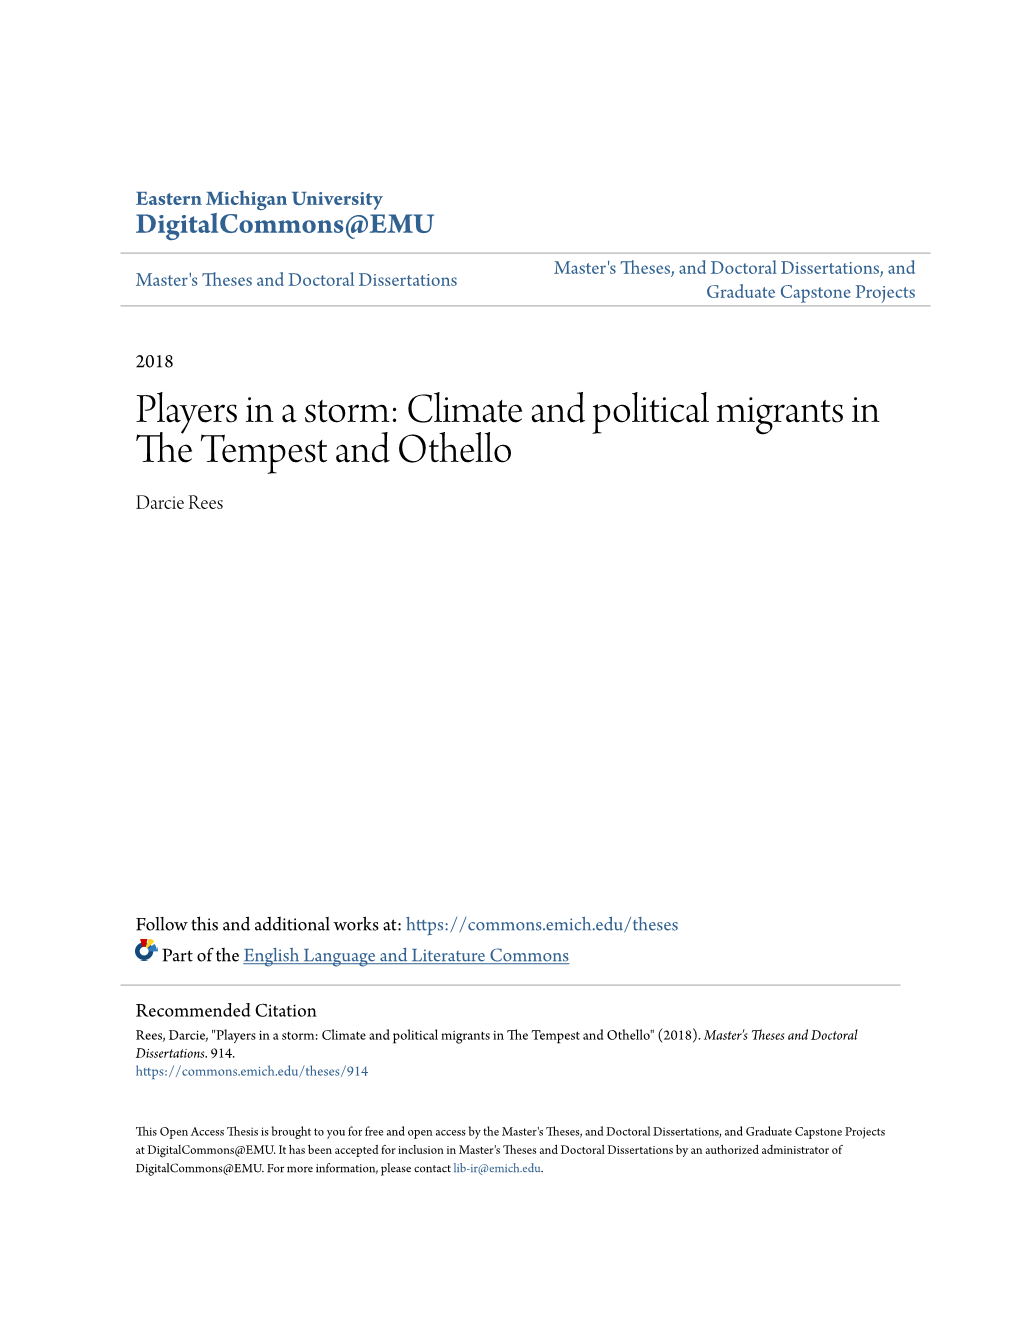 Climate and Political Migrants in the Tempest and Othello